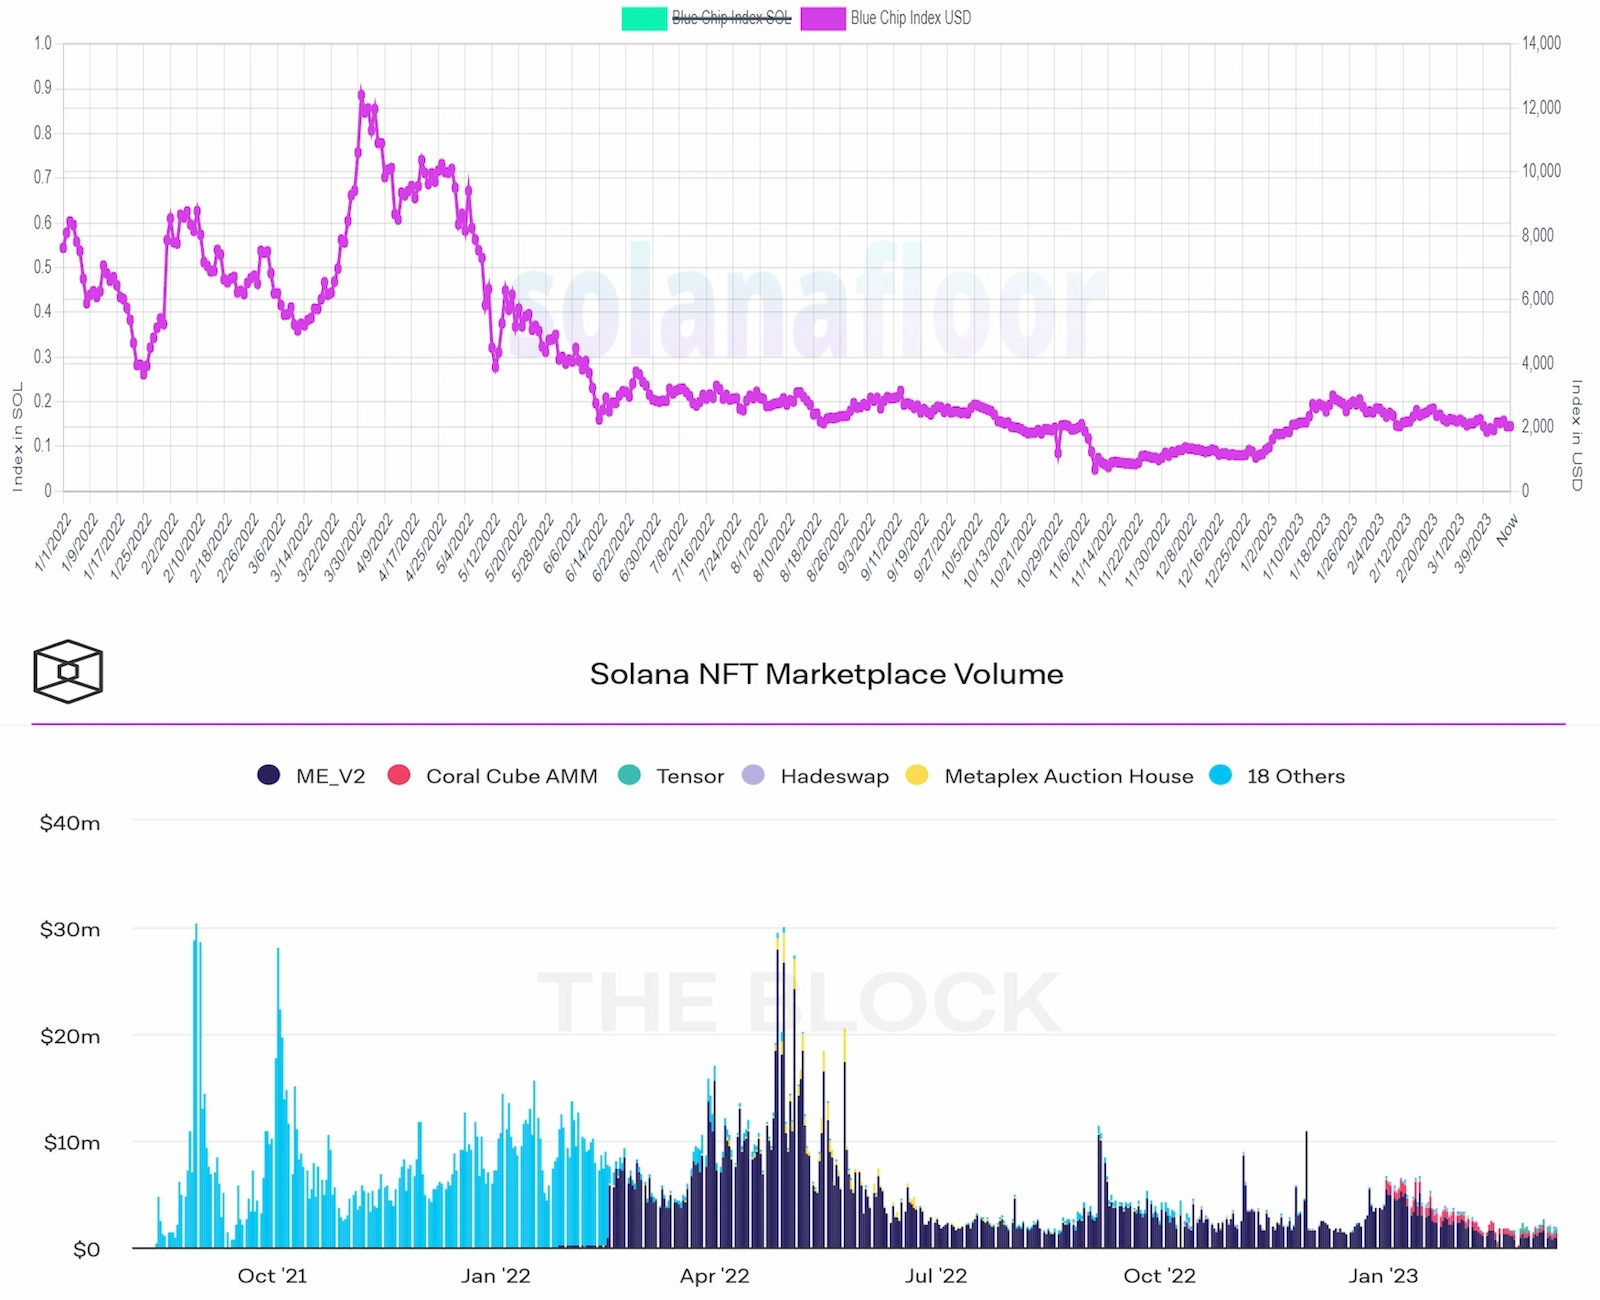 Solana NFTs price index and marketplace volume chart.